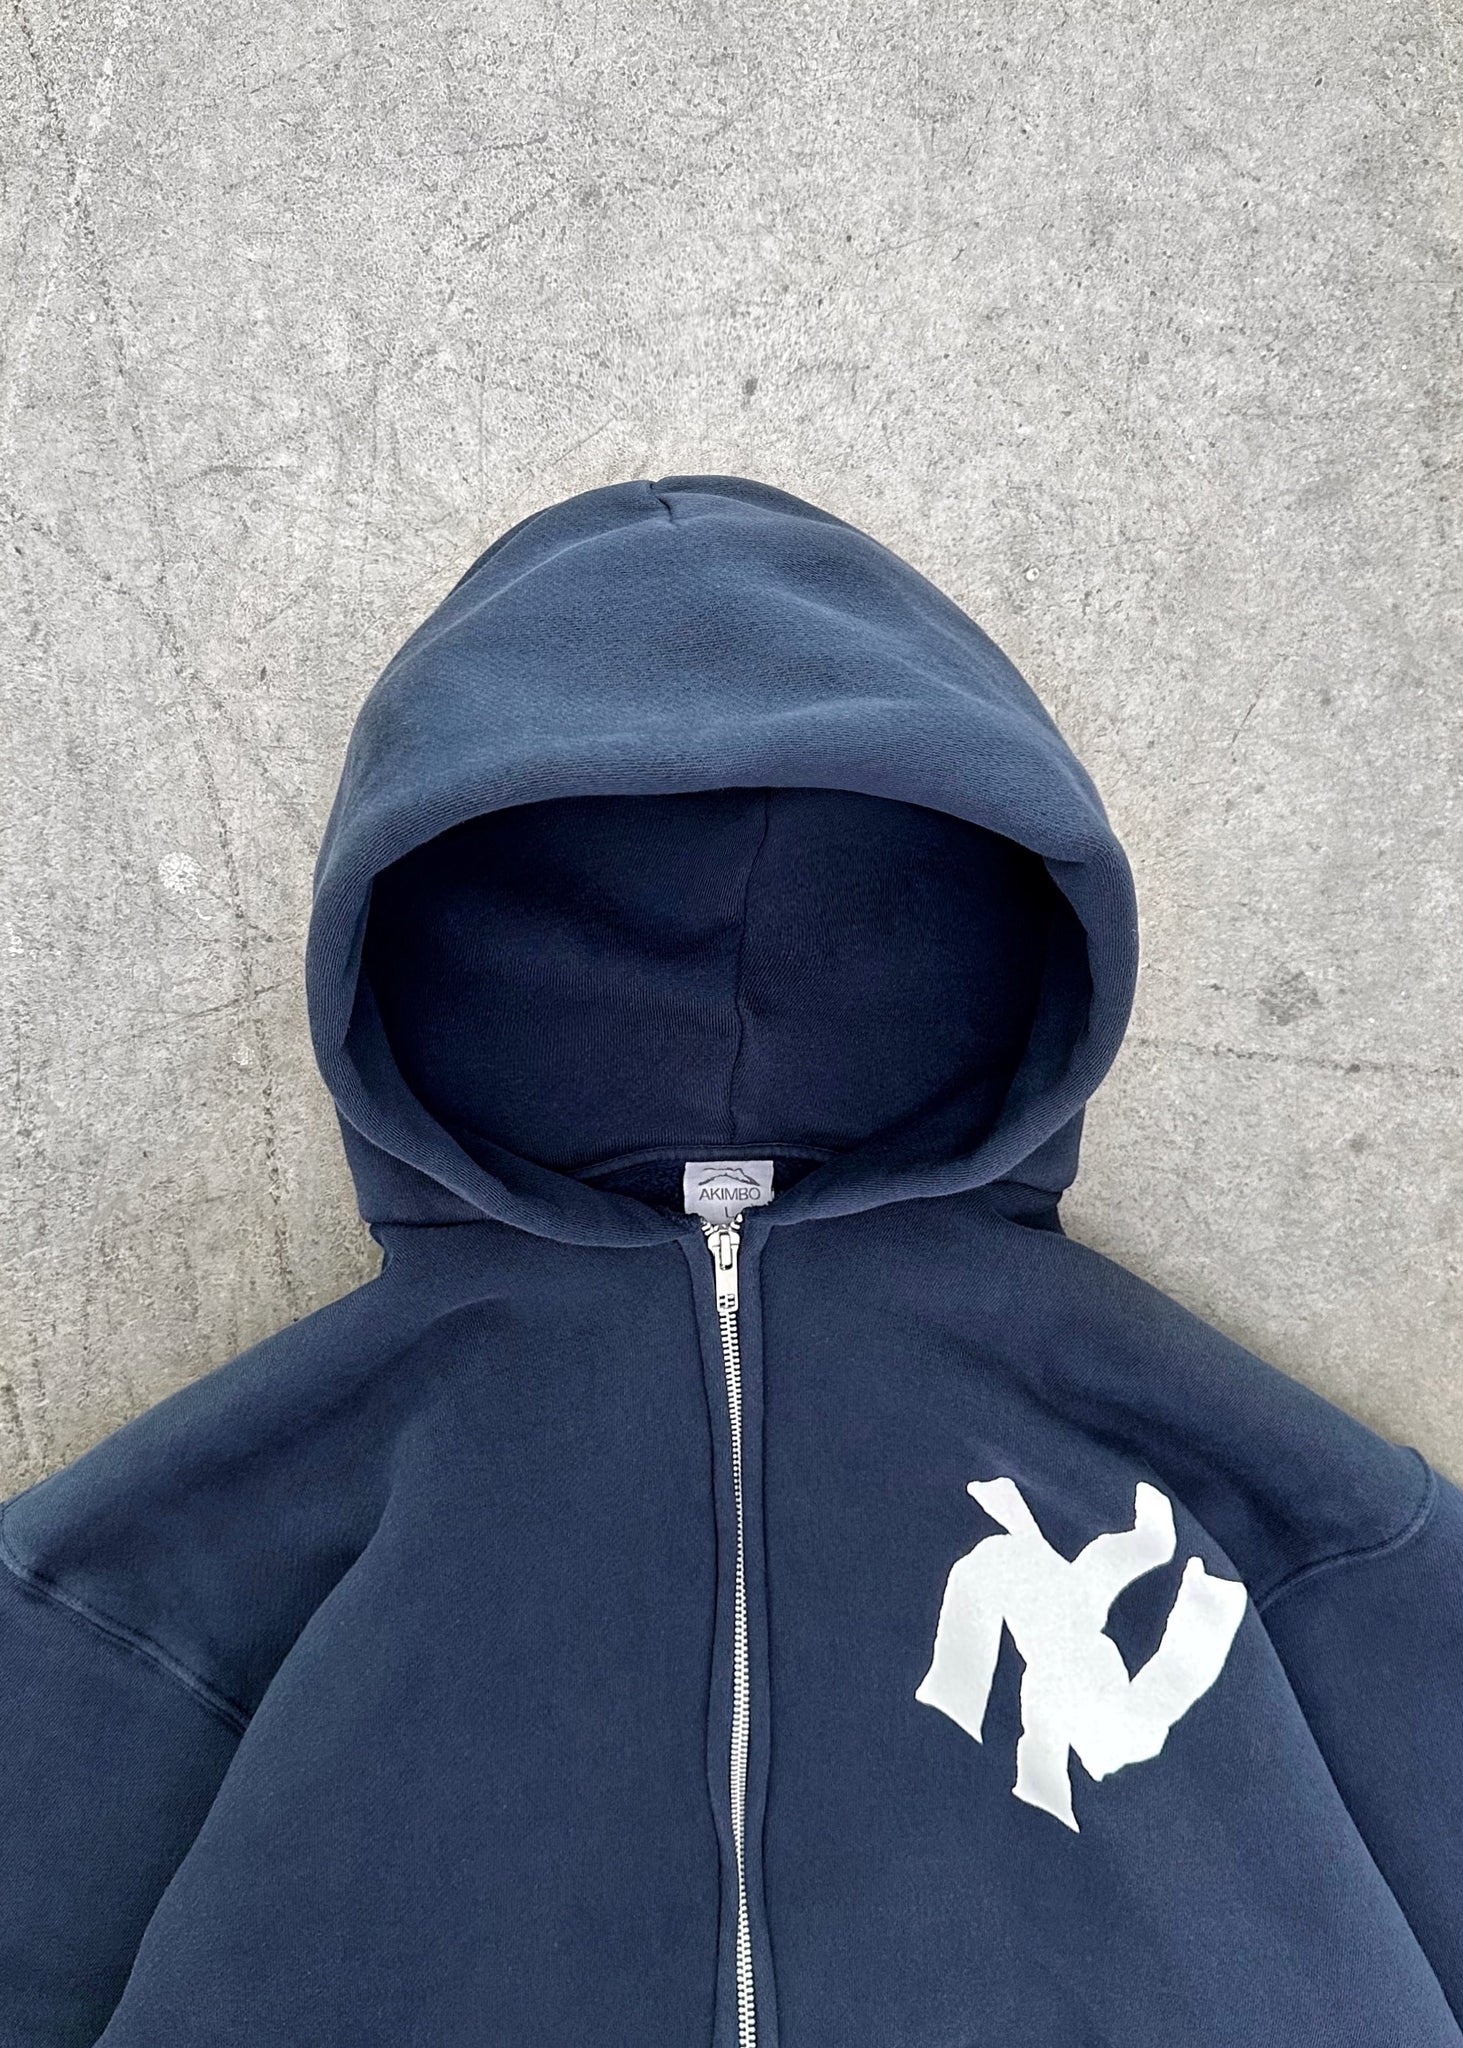 【Akimbo Club】 NY NOODLE ZIP HOODIE L即決致します